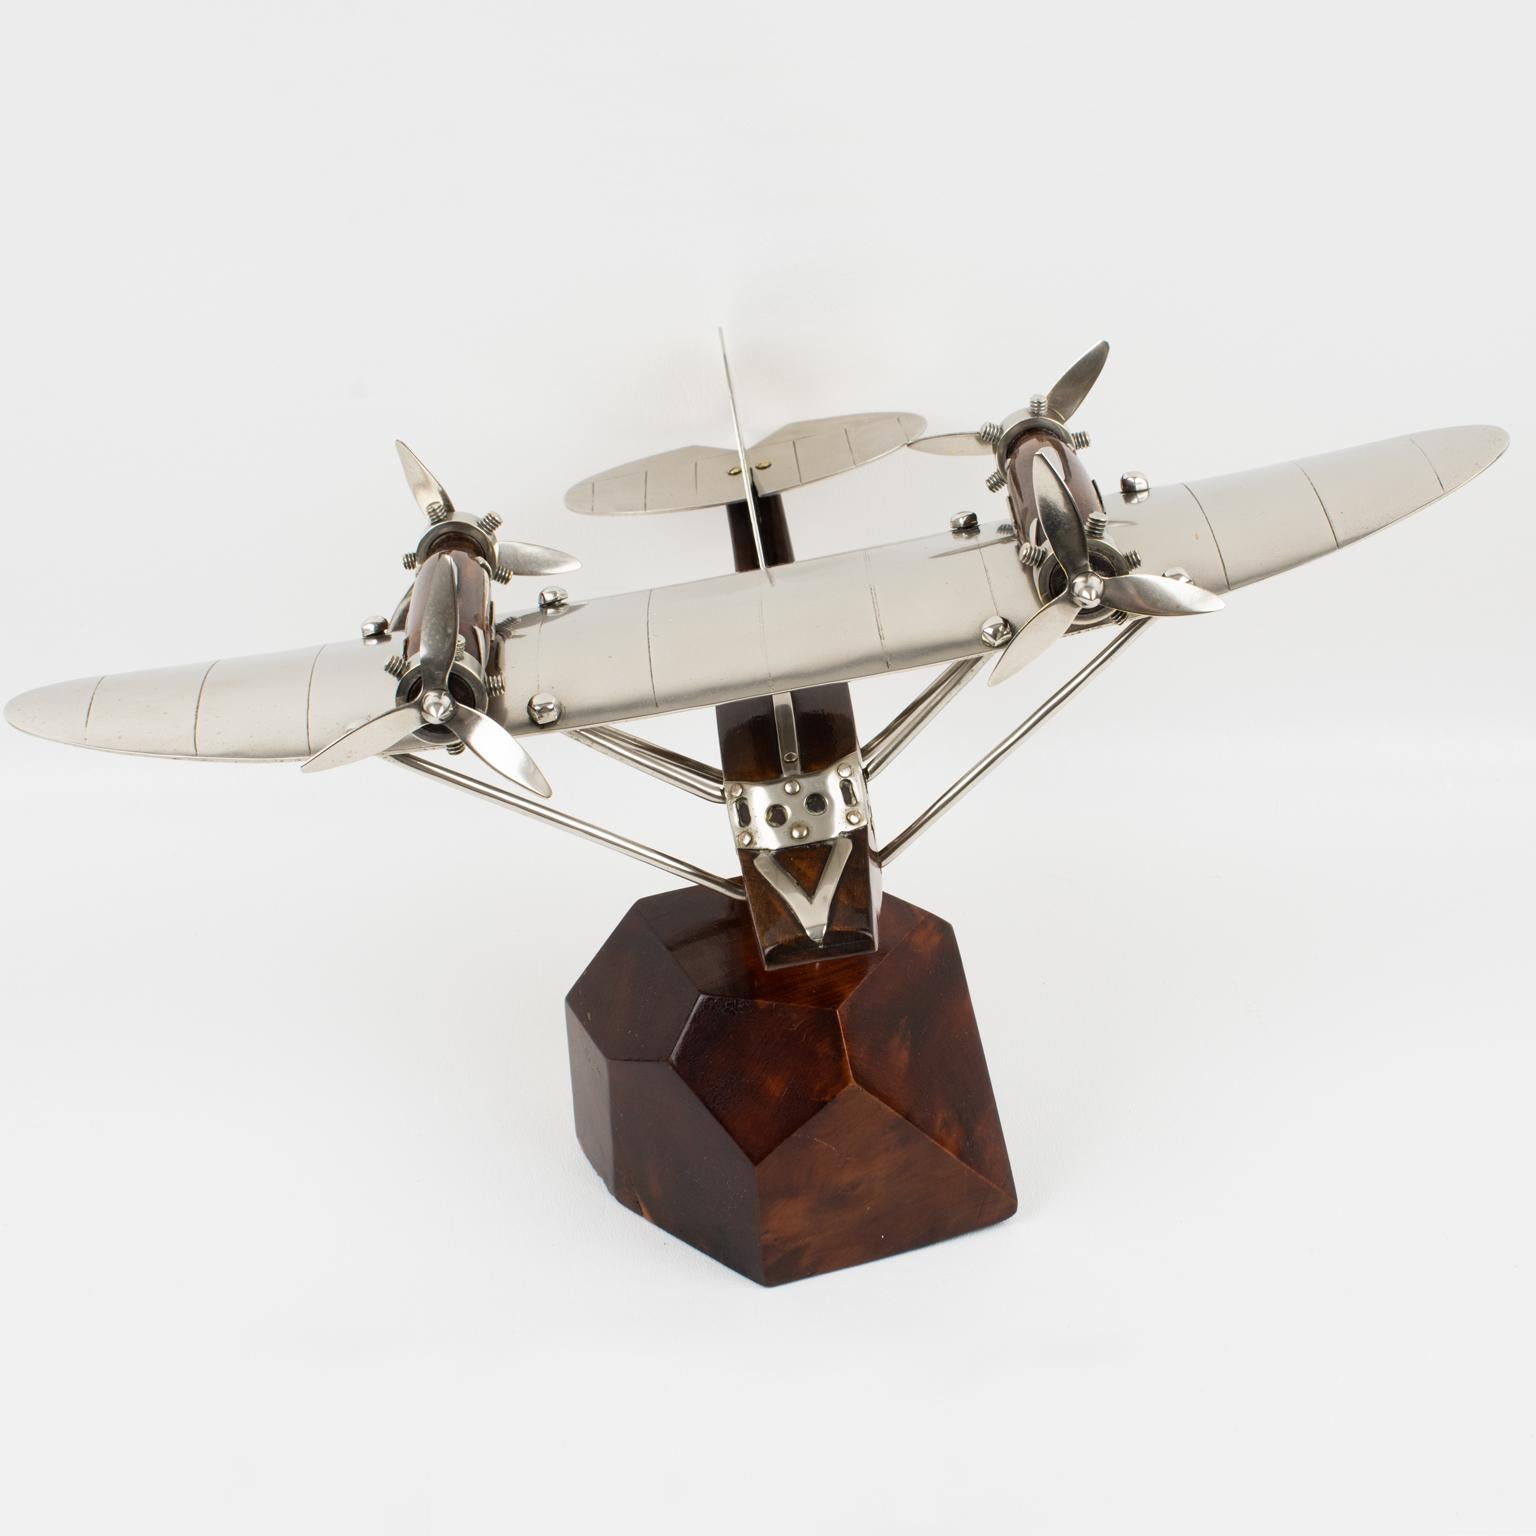 French Art Deco Wood and Chrome Airplane SeaPlane Aviation Model, 1940s In Excellent Condition For Sale In Atlanta, GA